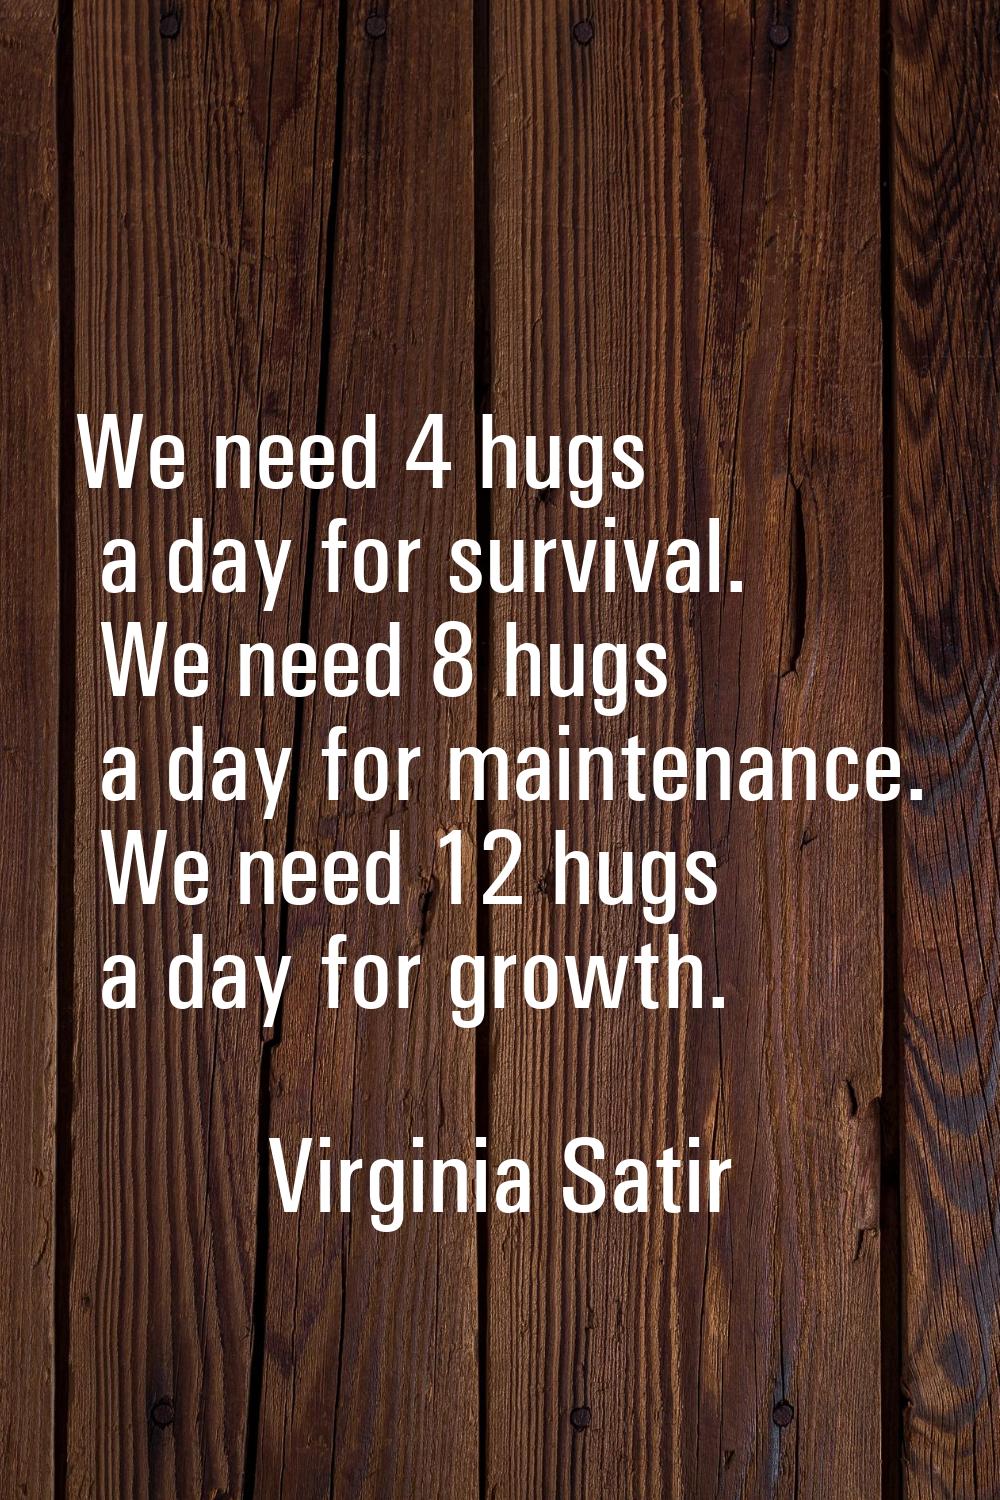 We need 4 hugs a day for survival. We need 8 hugs a day for maintenance. We need 12 hugs a day for 